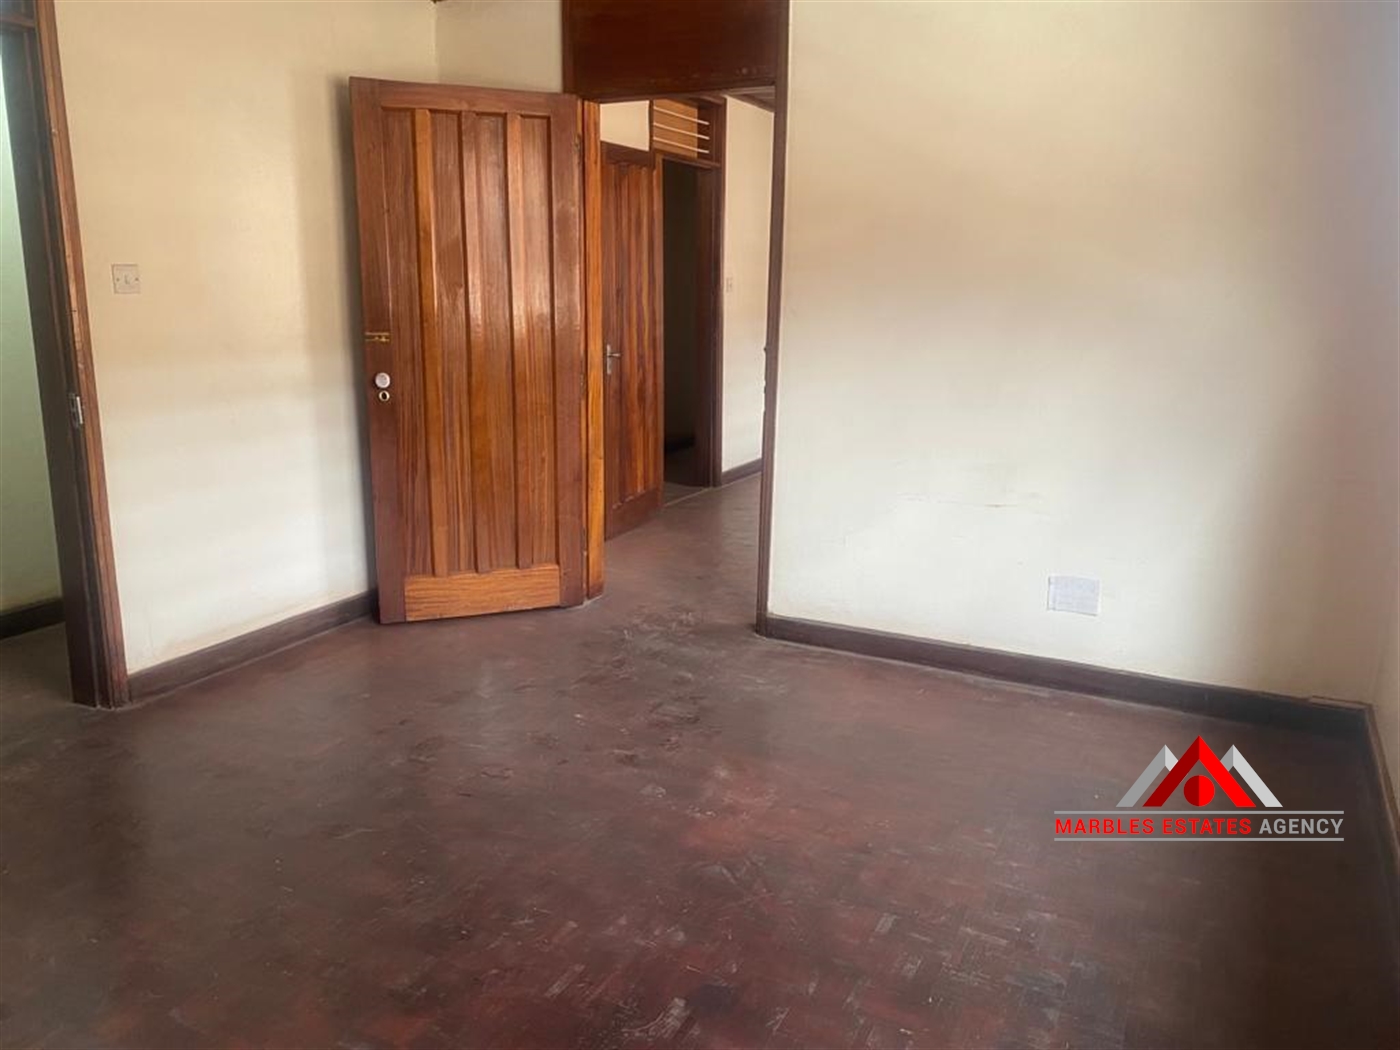 Office Space for rent in Industrialarea Kampala